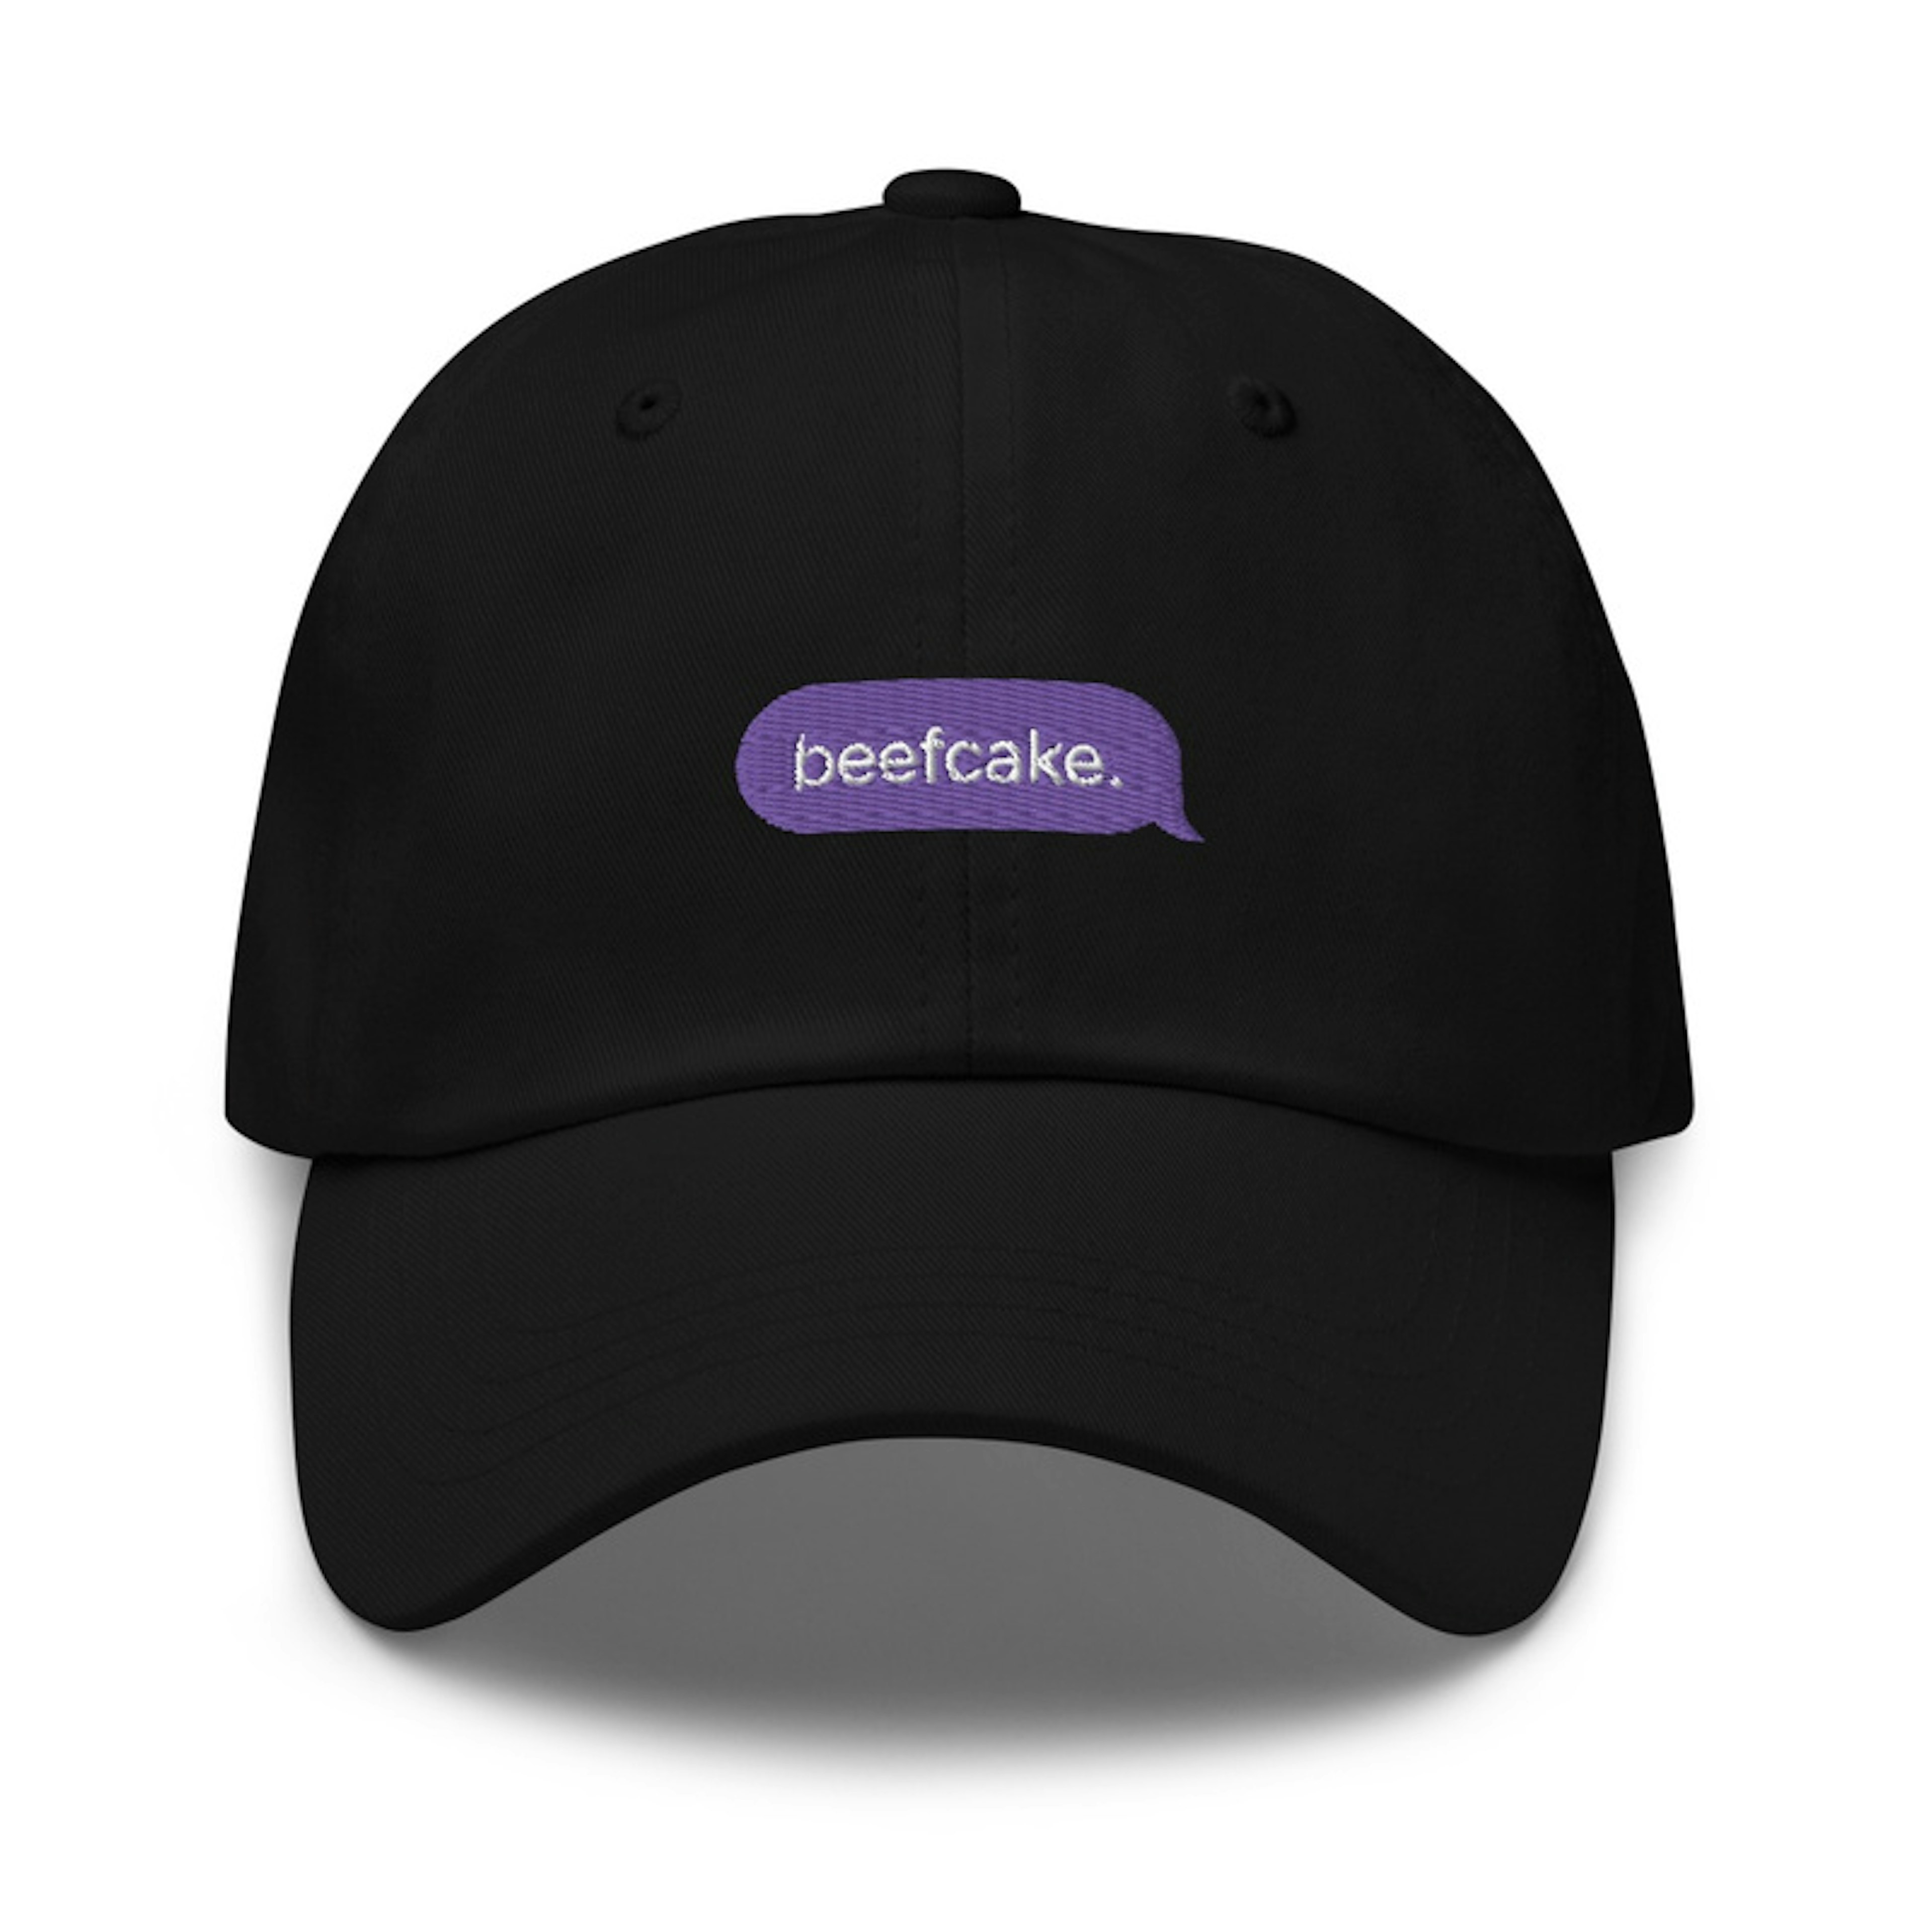 DAD HAT - "beefcake." EMBROIDERED